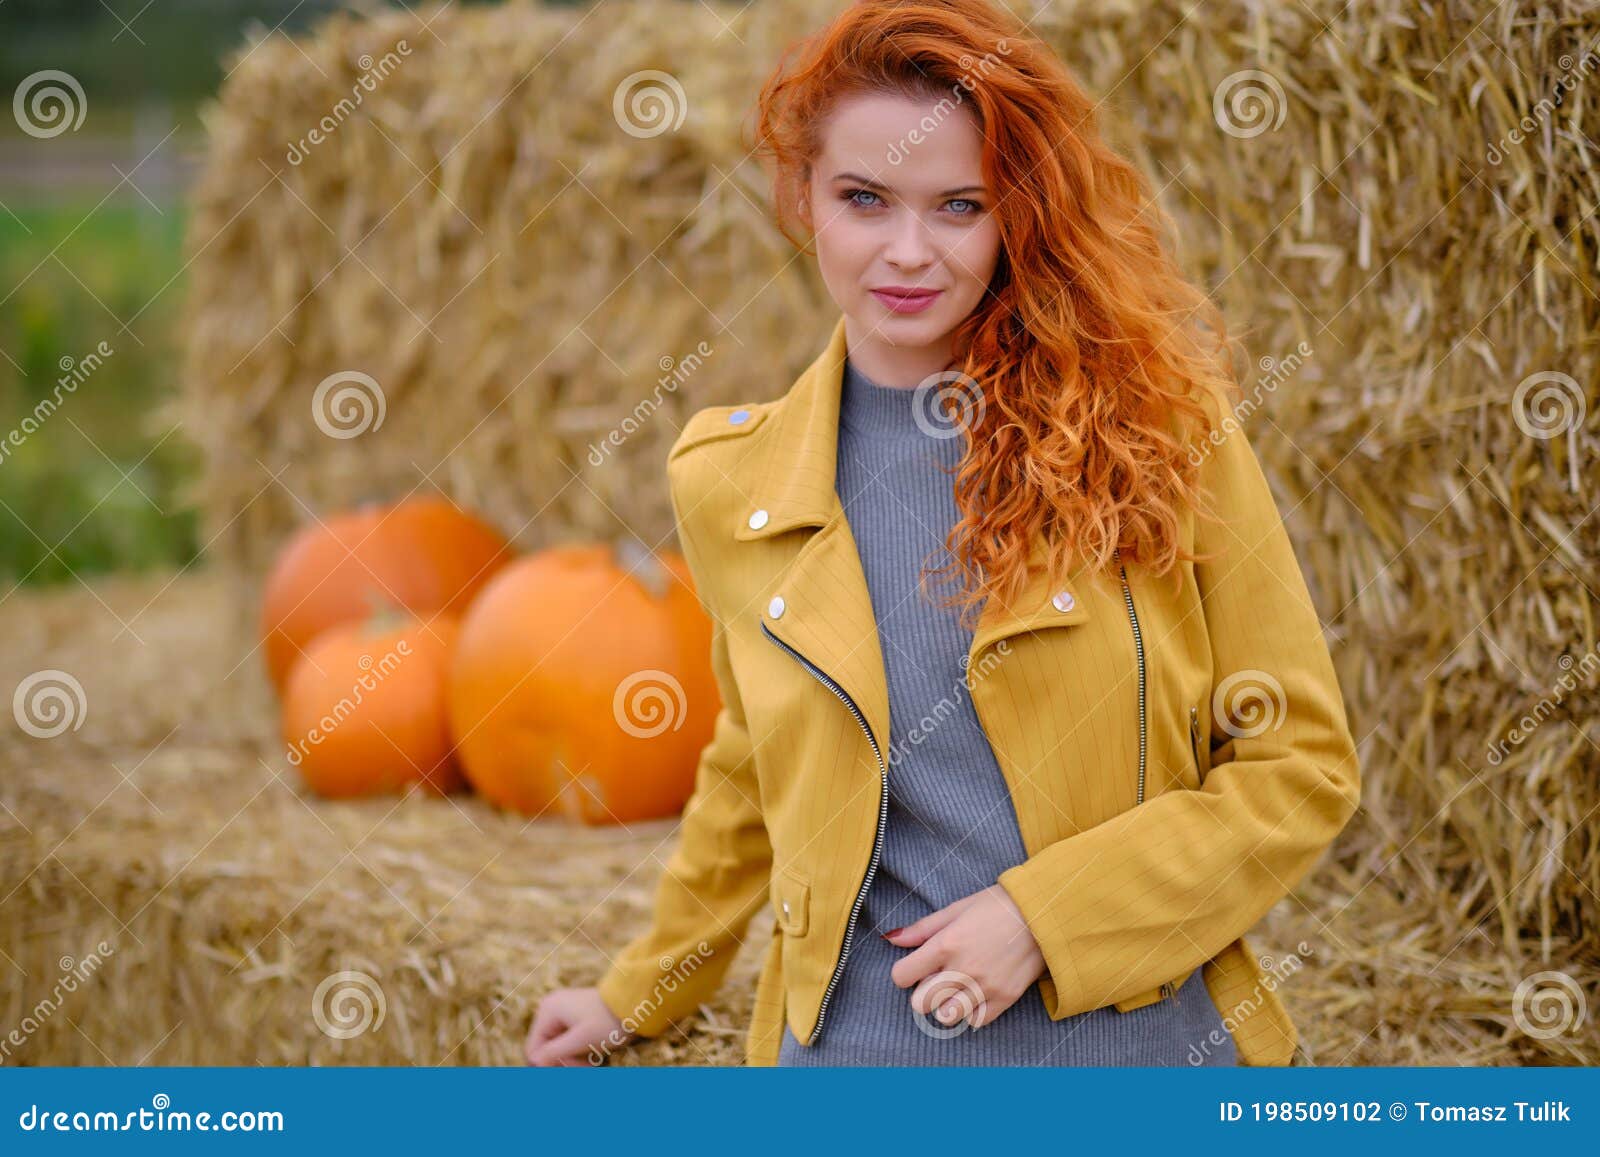 Autumn Portrait of a Beautiful Woman with Pumpkins Stock Photo - Image ...